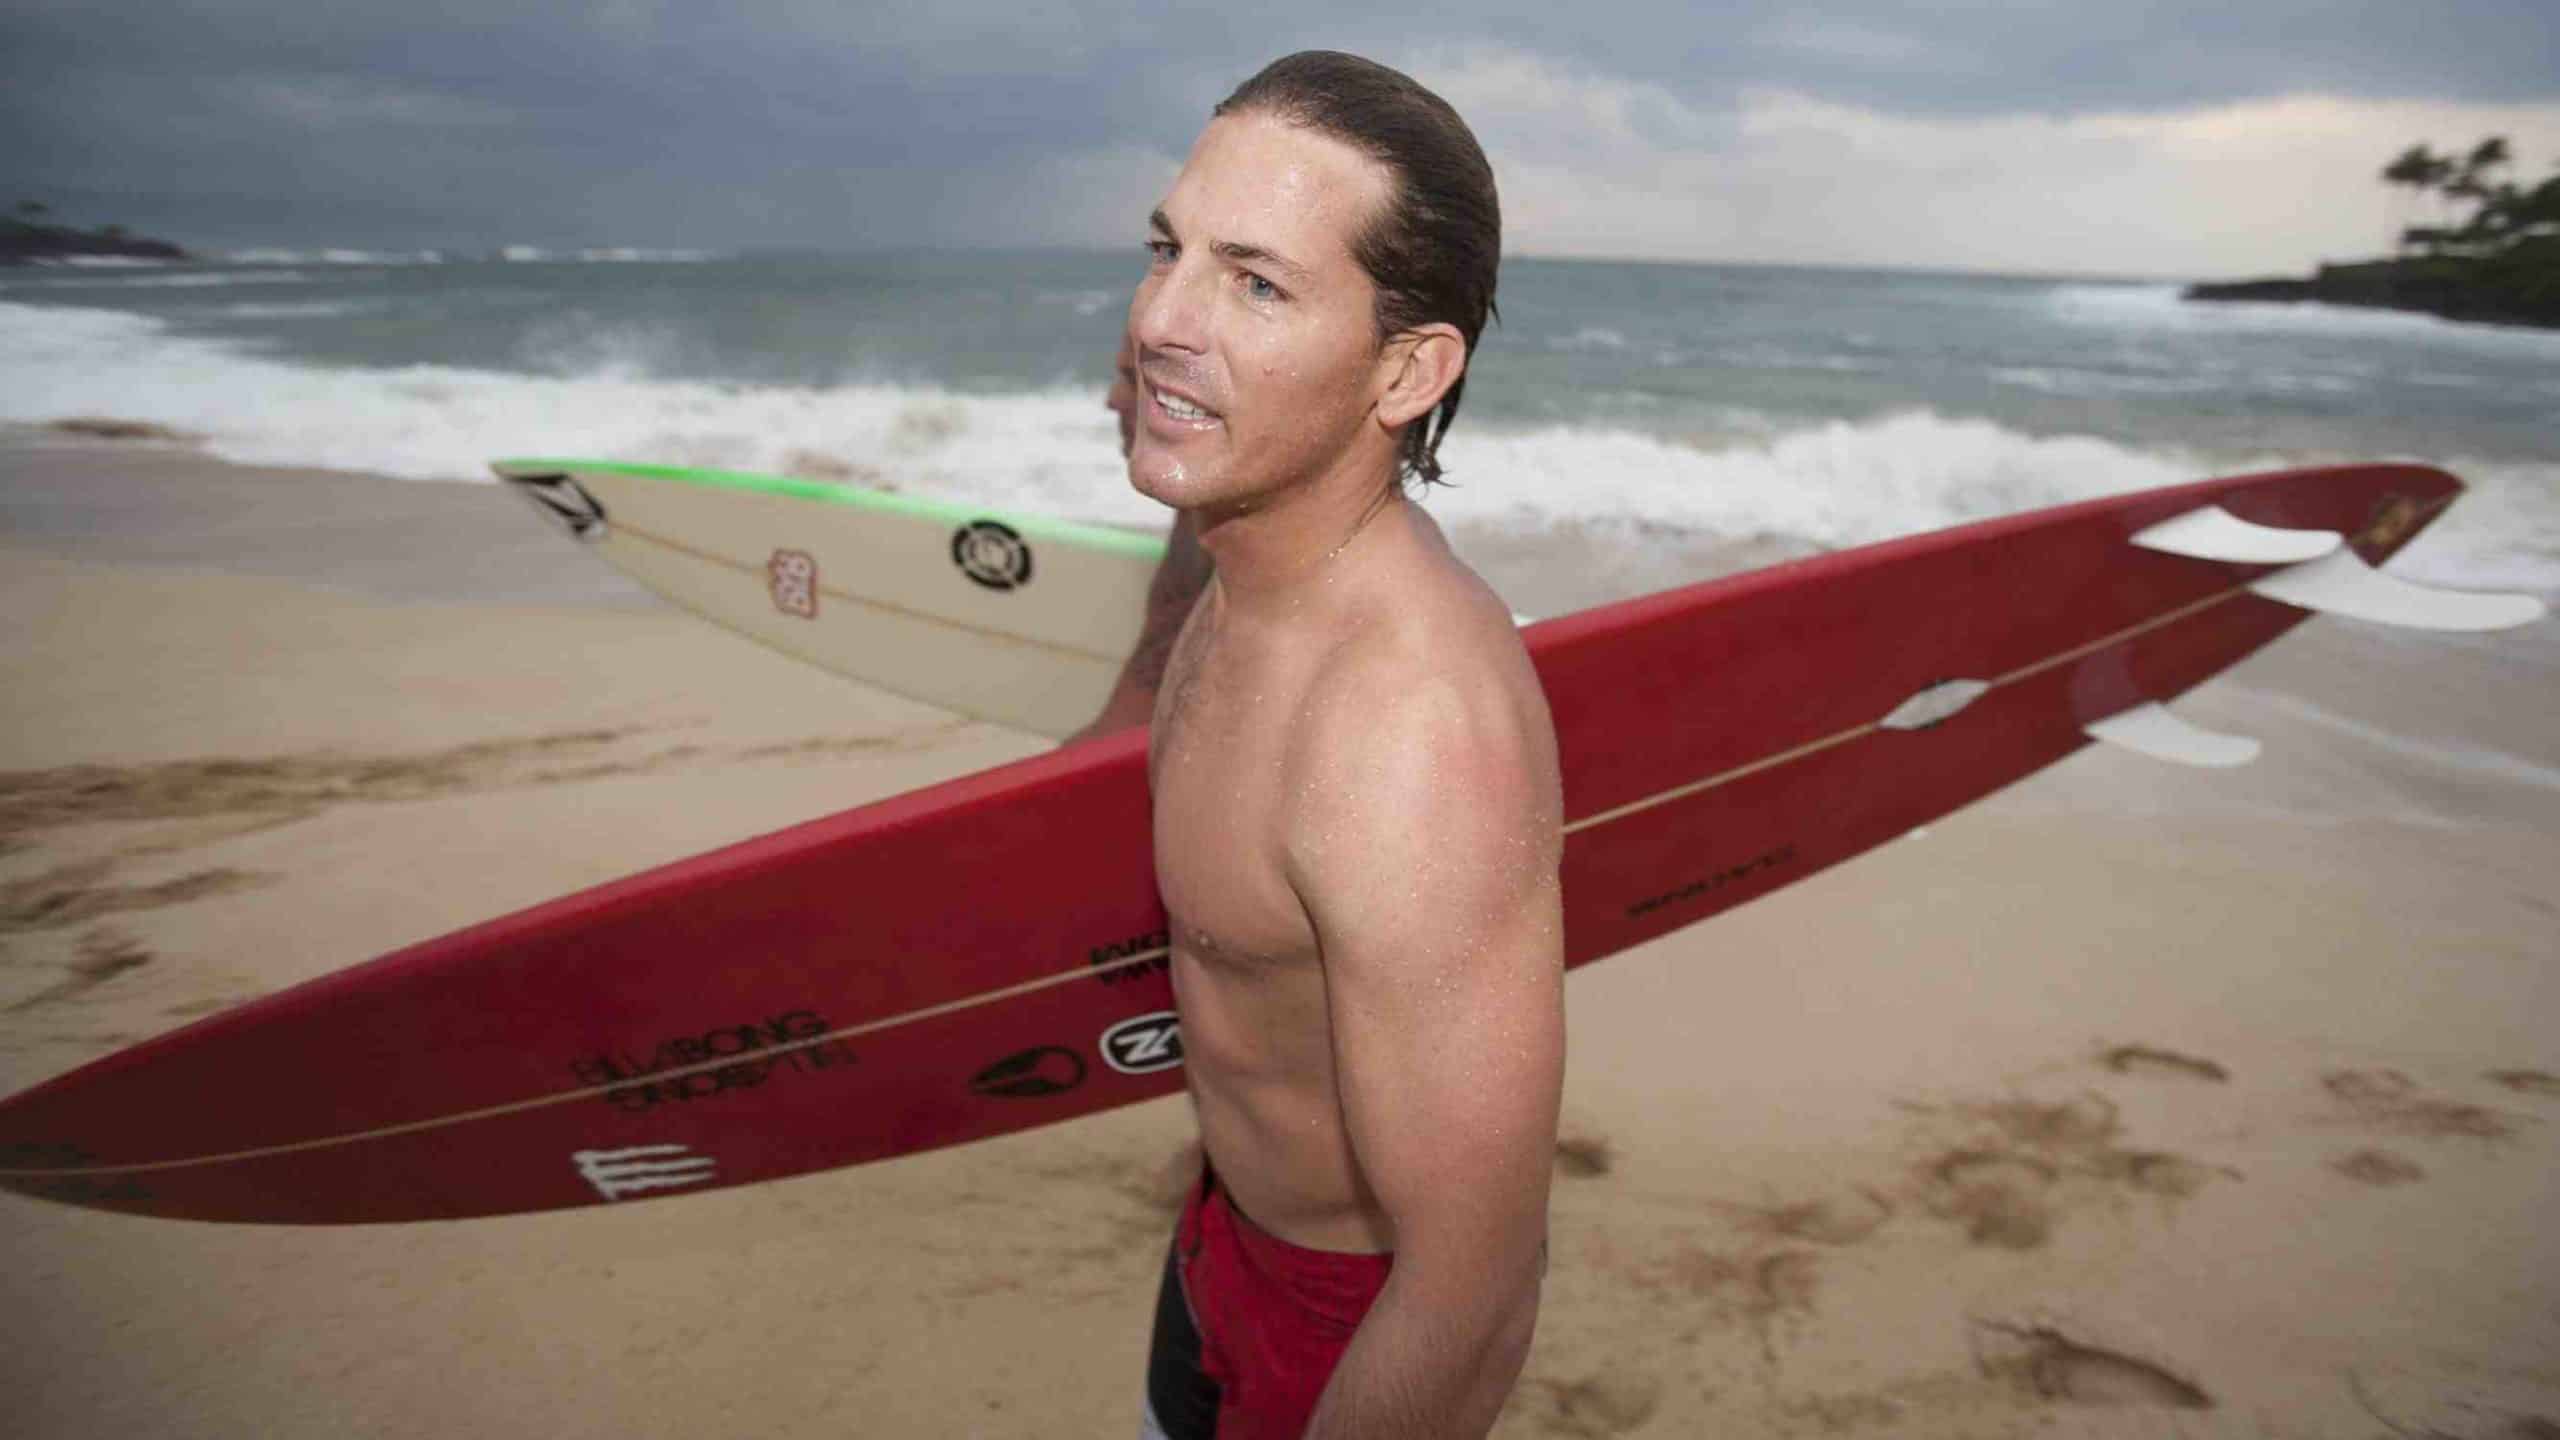 Was Andy Irons good?